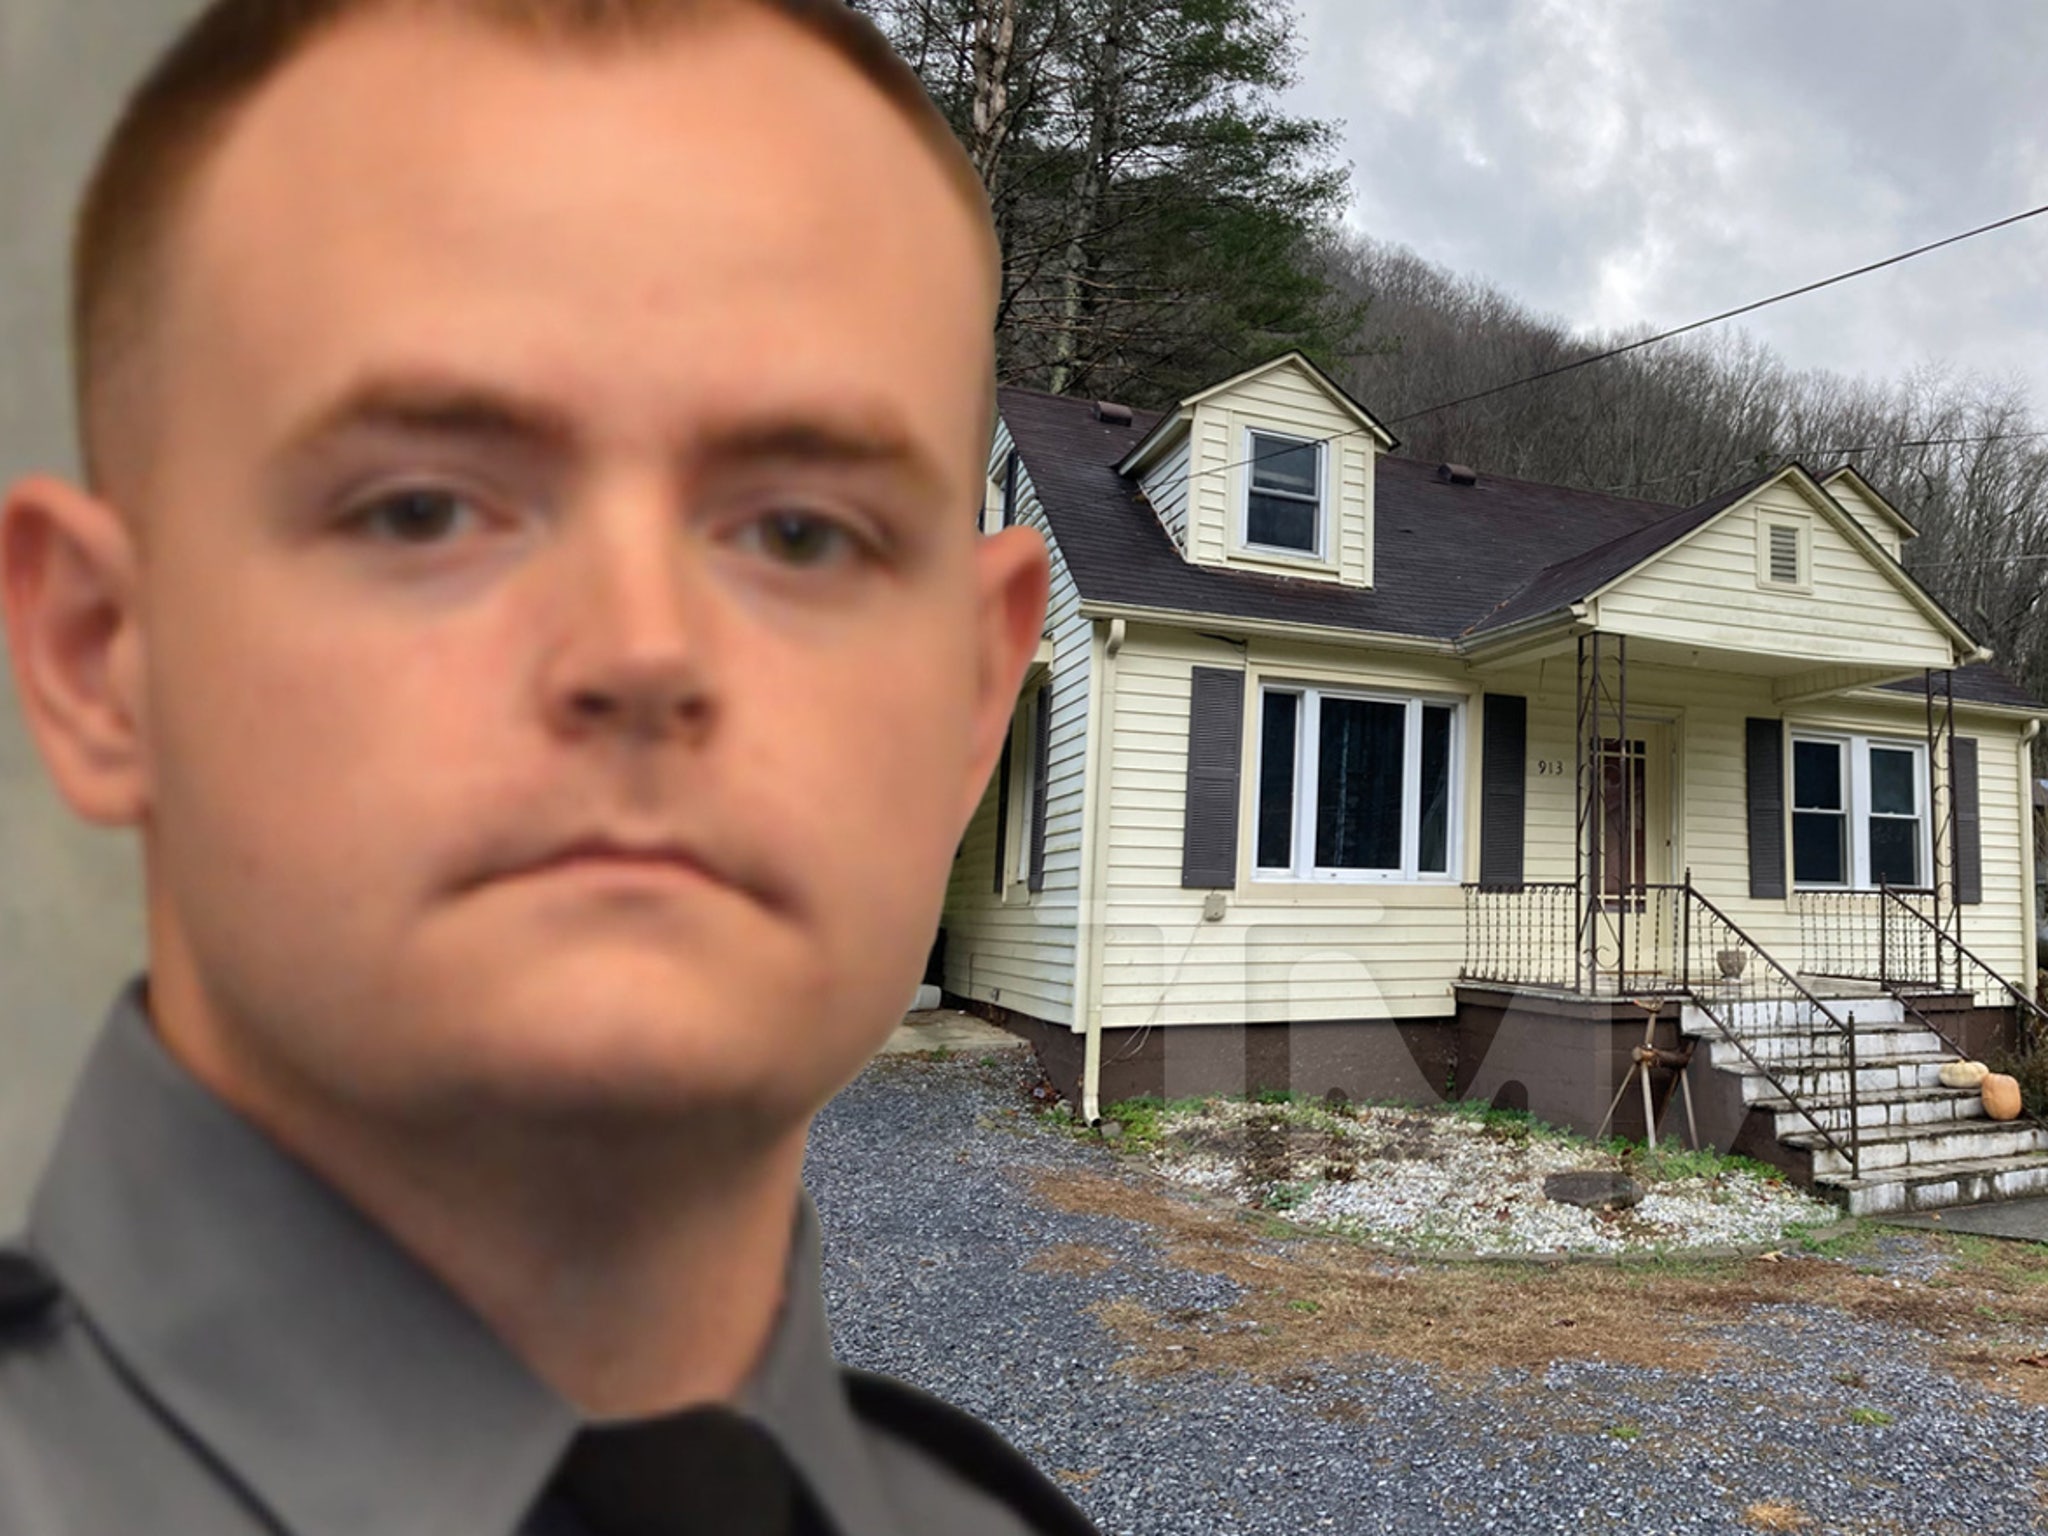 Catfish' Murderer Austin Lee Edwards Blacked Out Windows at New Home Before  Killings